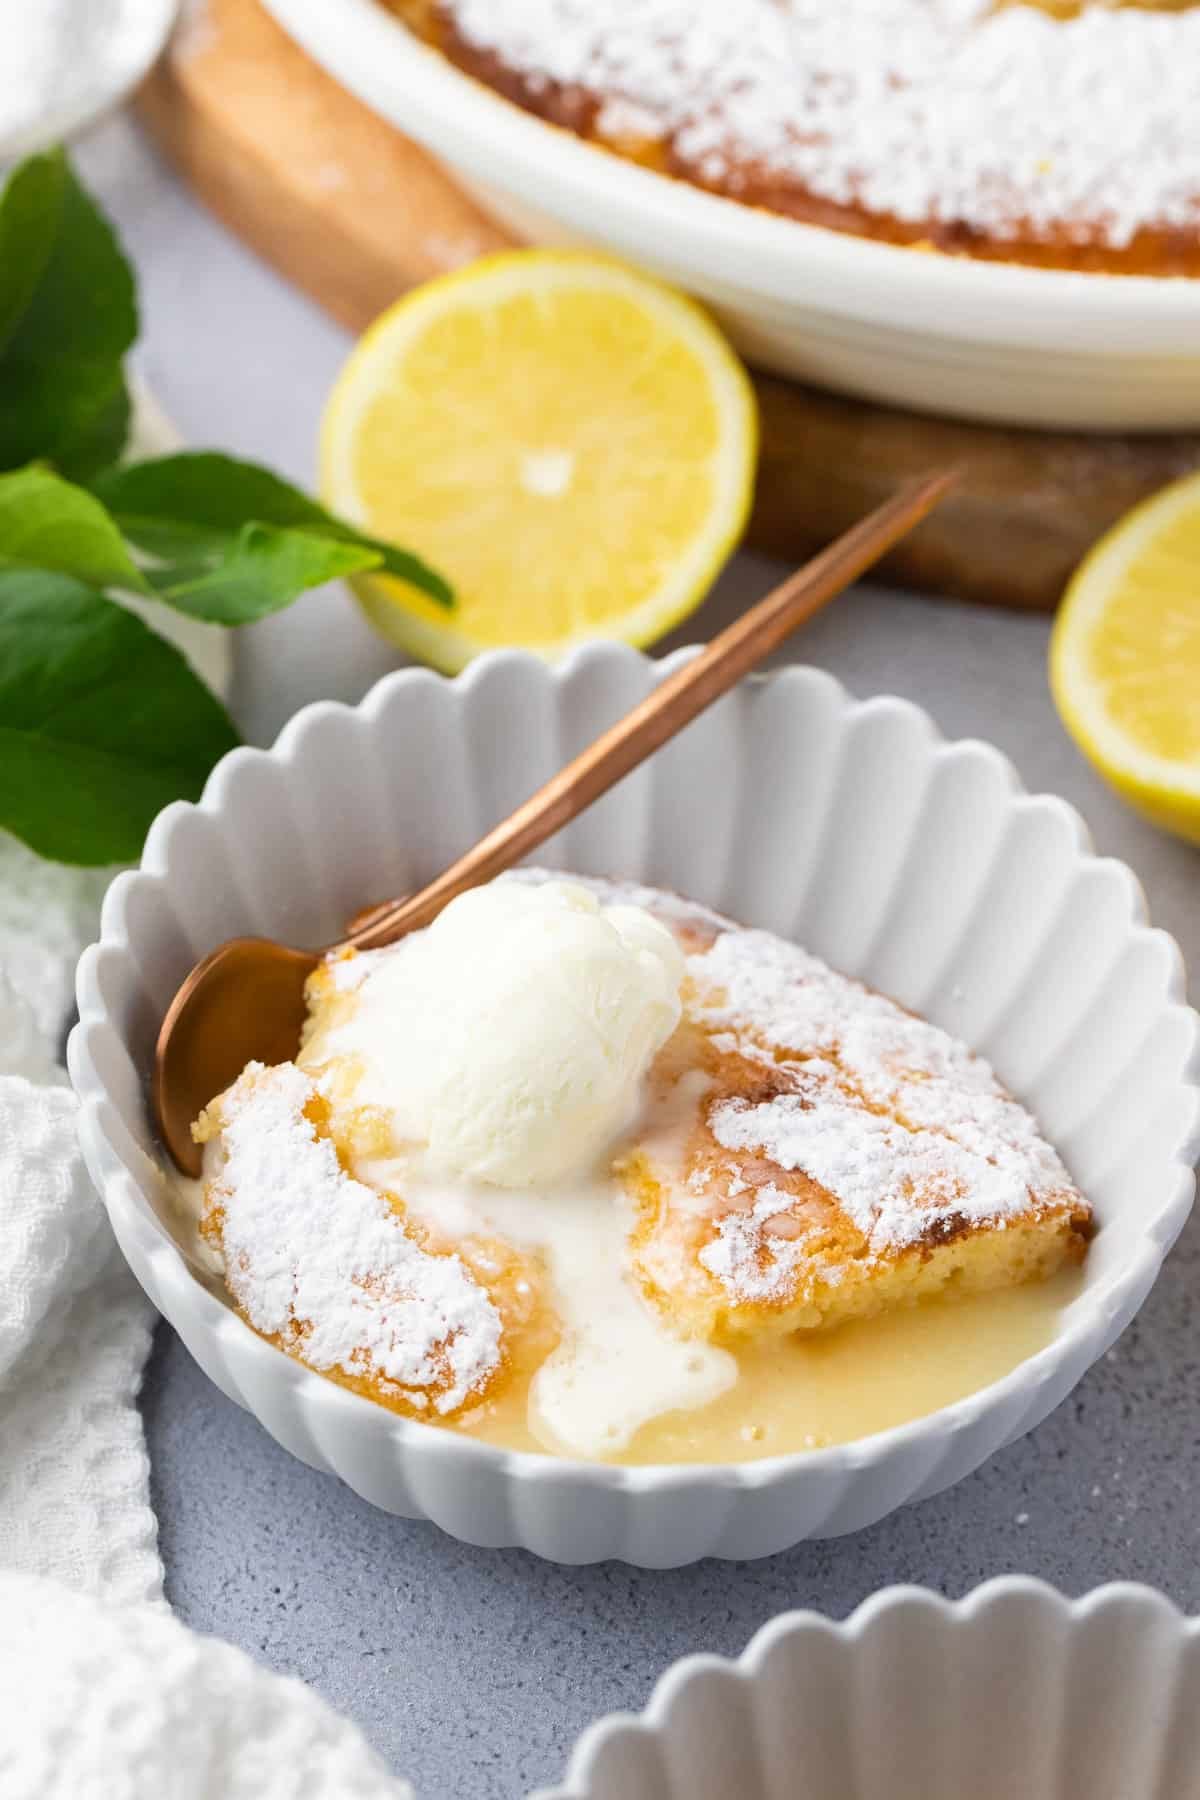 a bowl of lemon delicious pudding and a spoon, topped with a scoop of ice cream